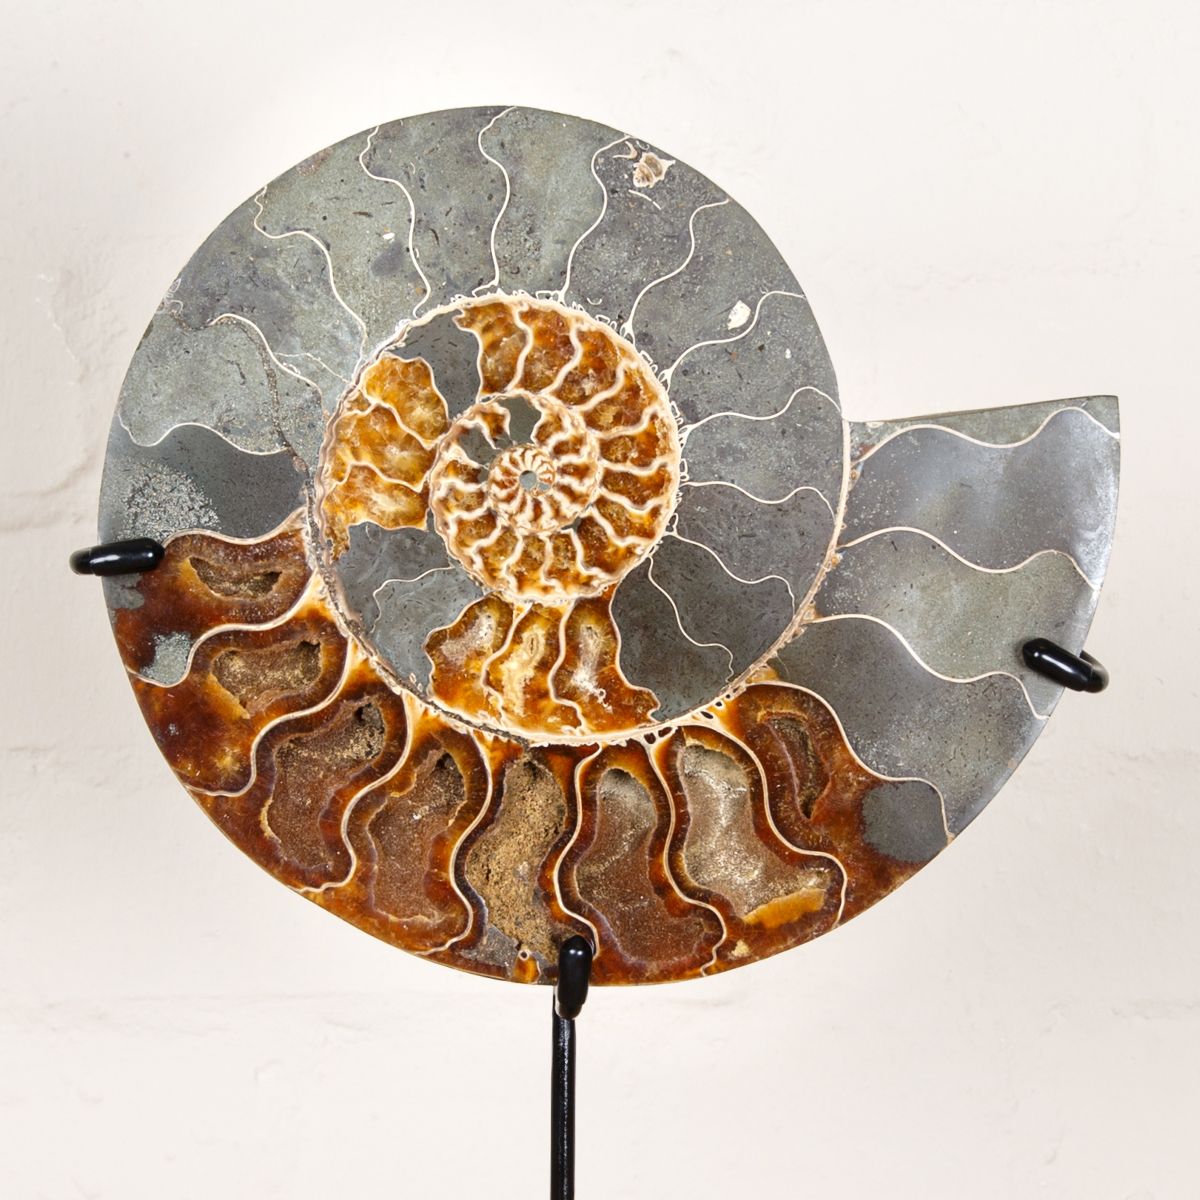 Huge 9.6 inch Polished & Sliced Ammonite Fossil on Stand (Cleoniceras sp)